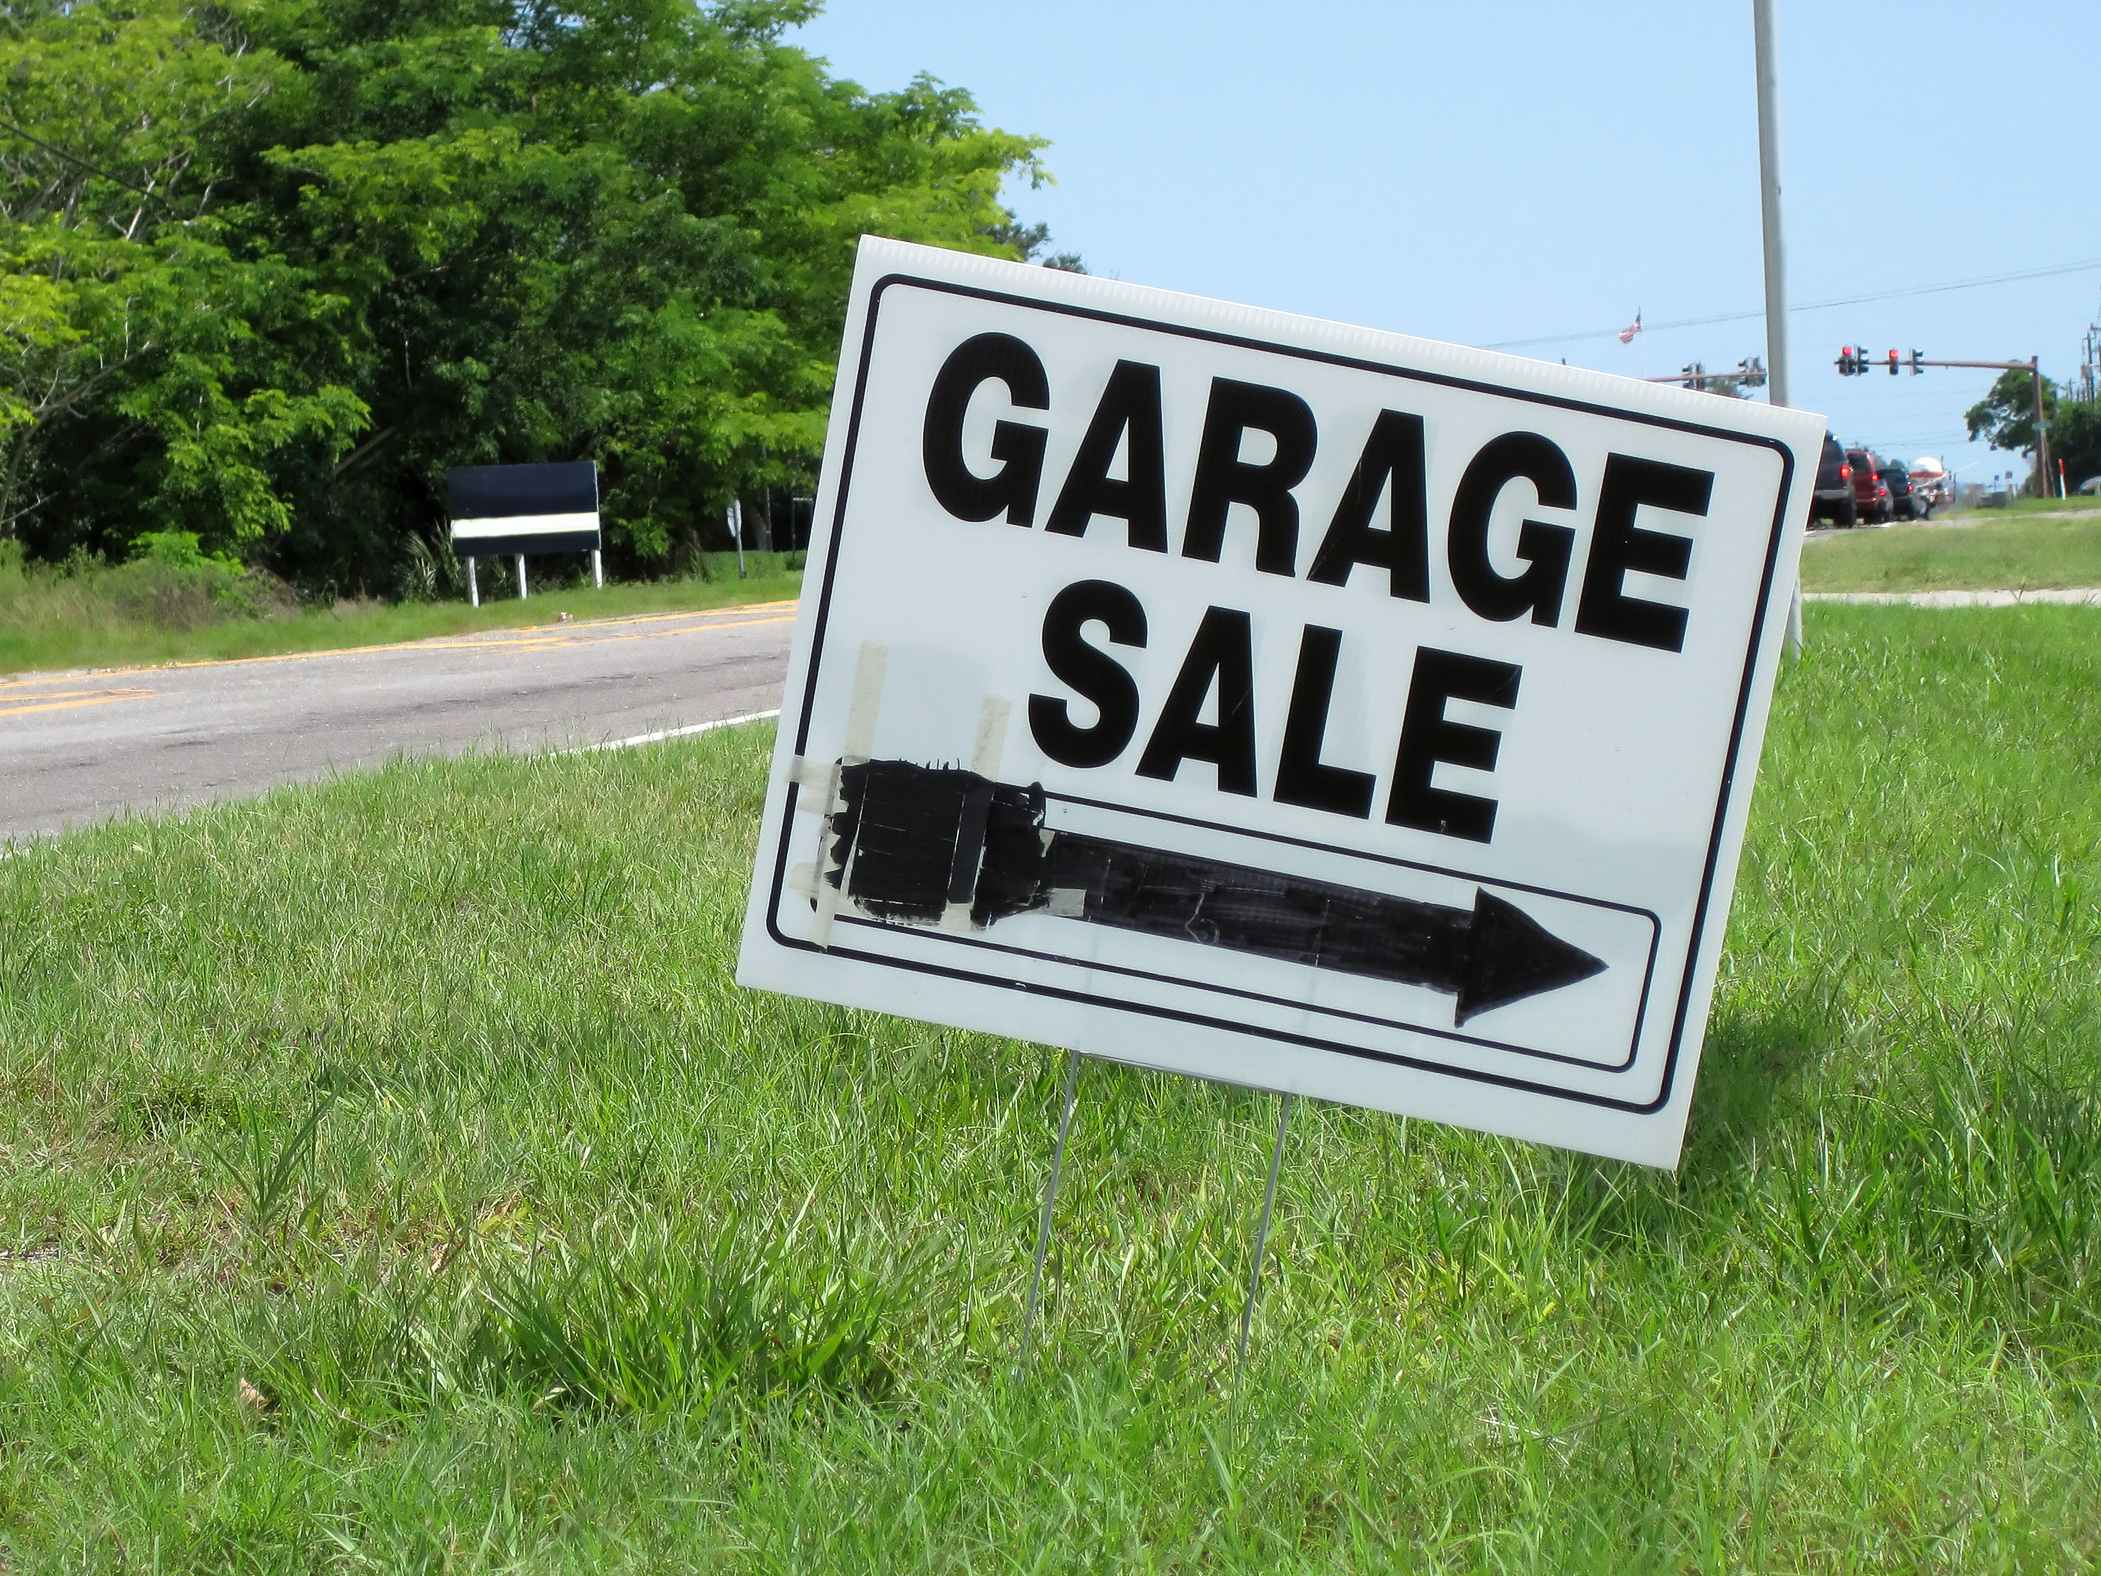 A Garage Sale sign on a curb with an arrow pointing to the right